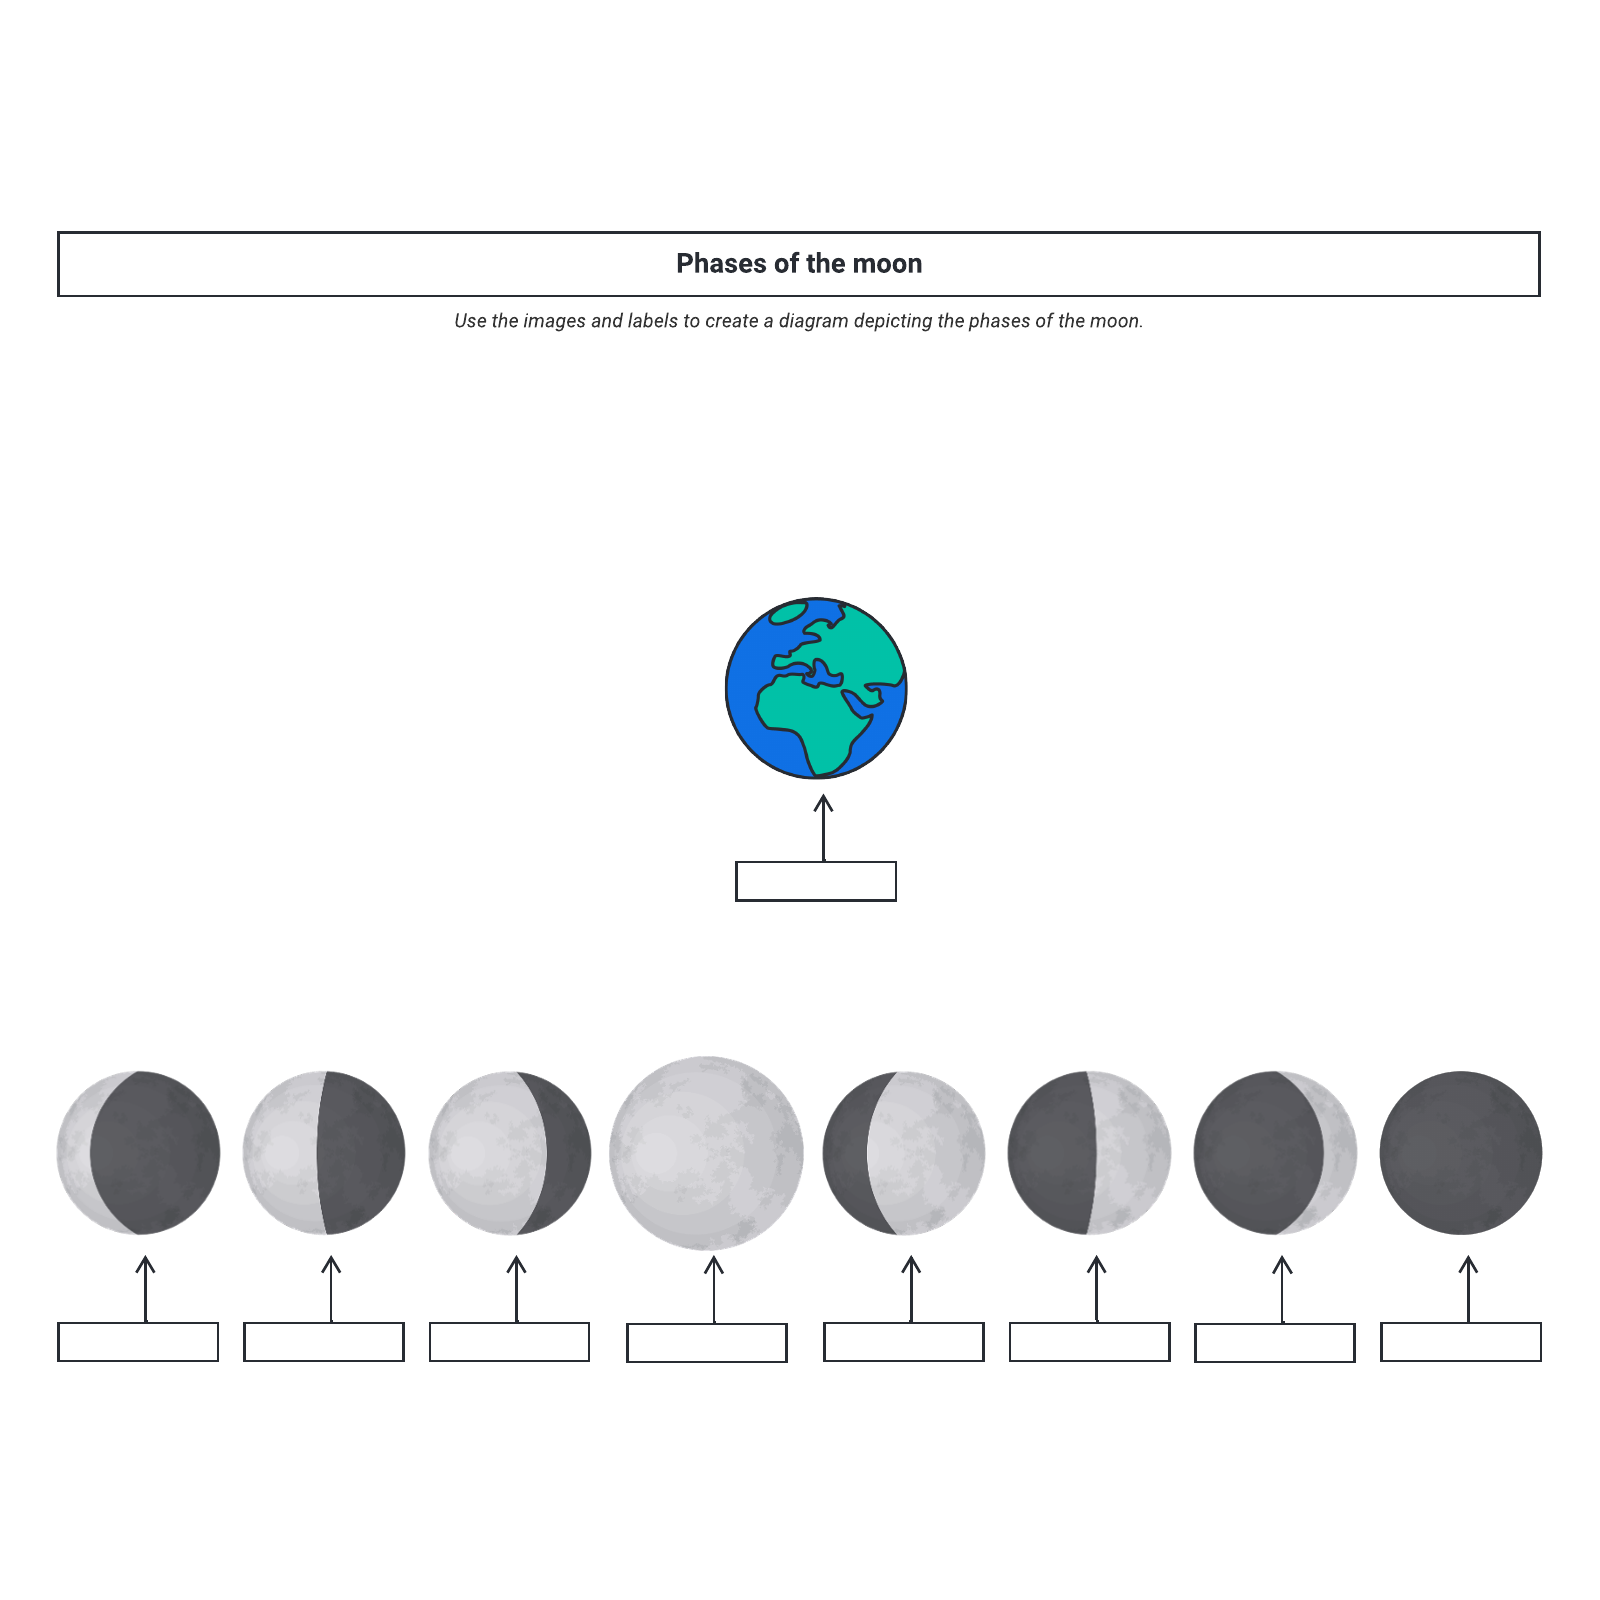 Phases of the moon example